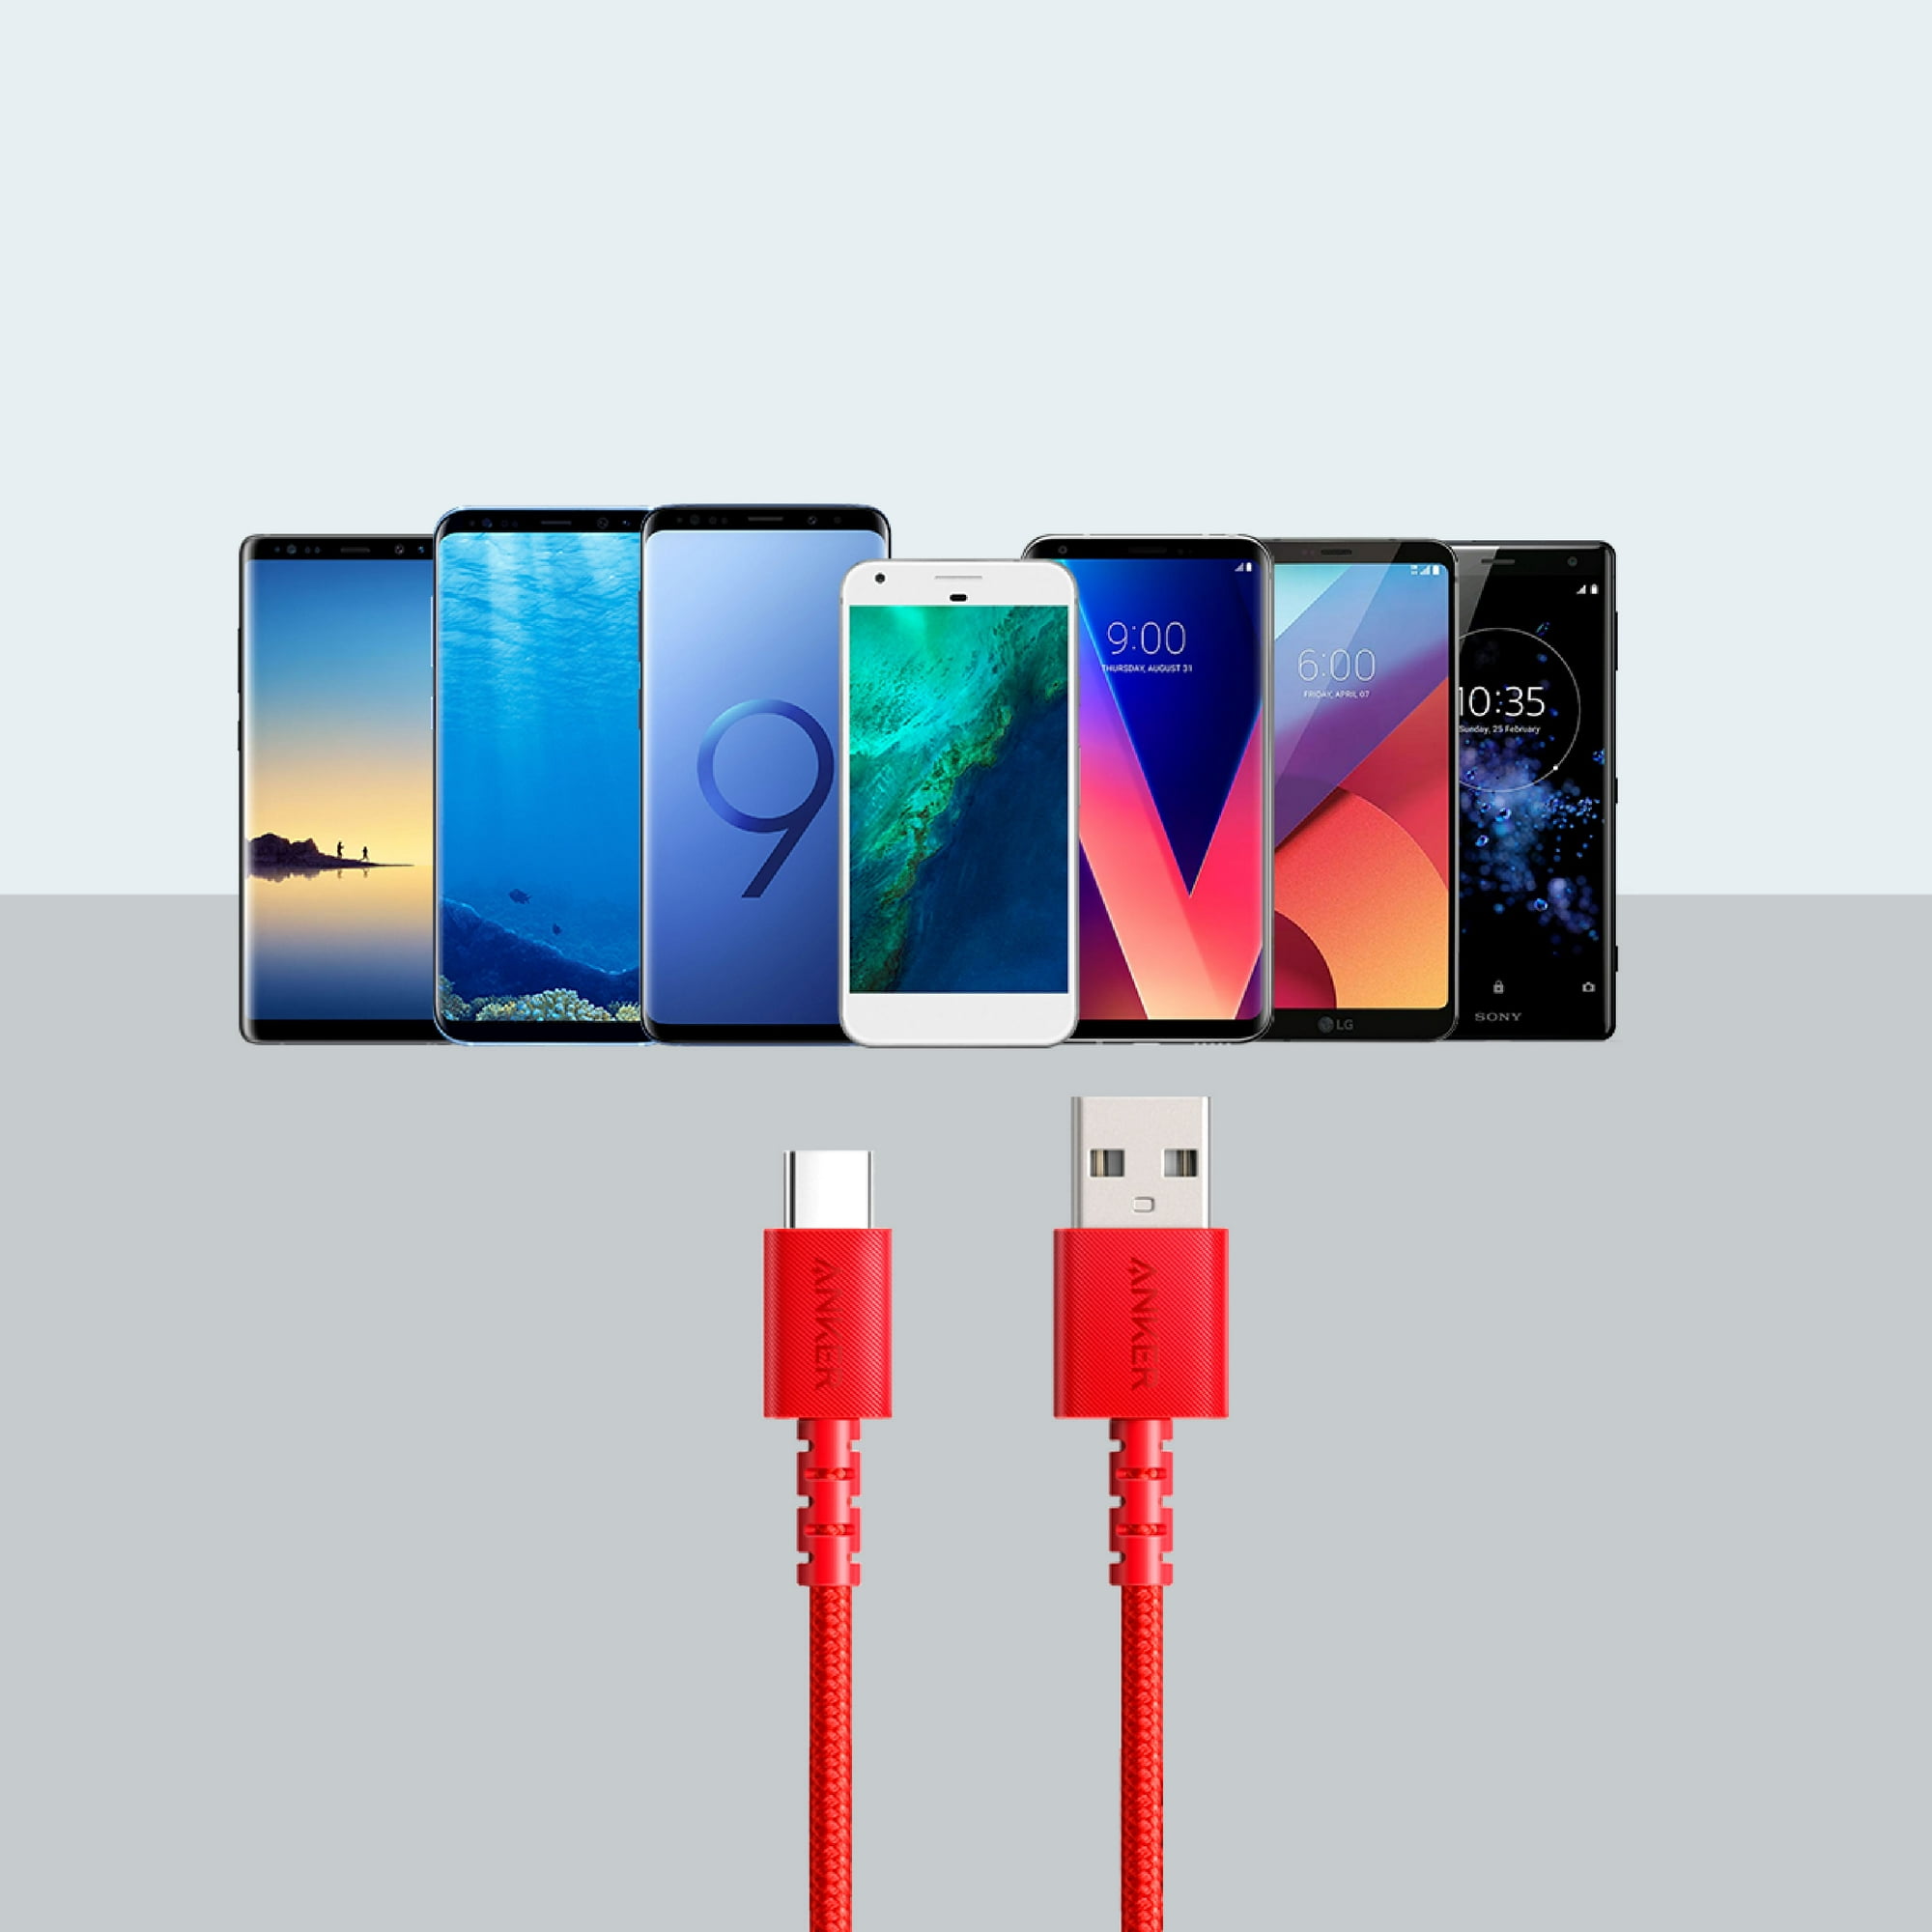 Anker PowerLine Select+ USB-C to USB 2.0 Cable (6ft), Red